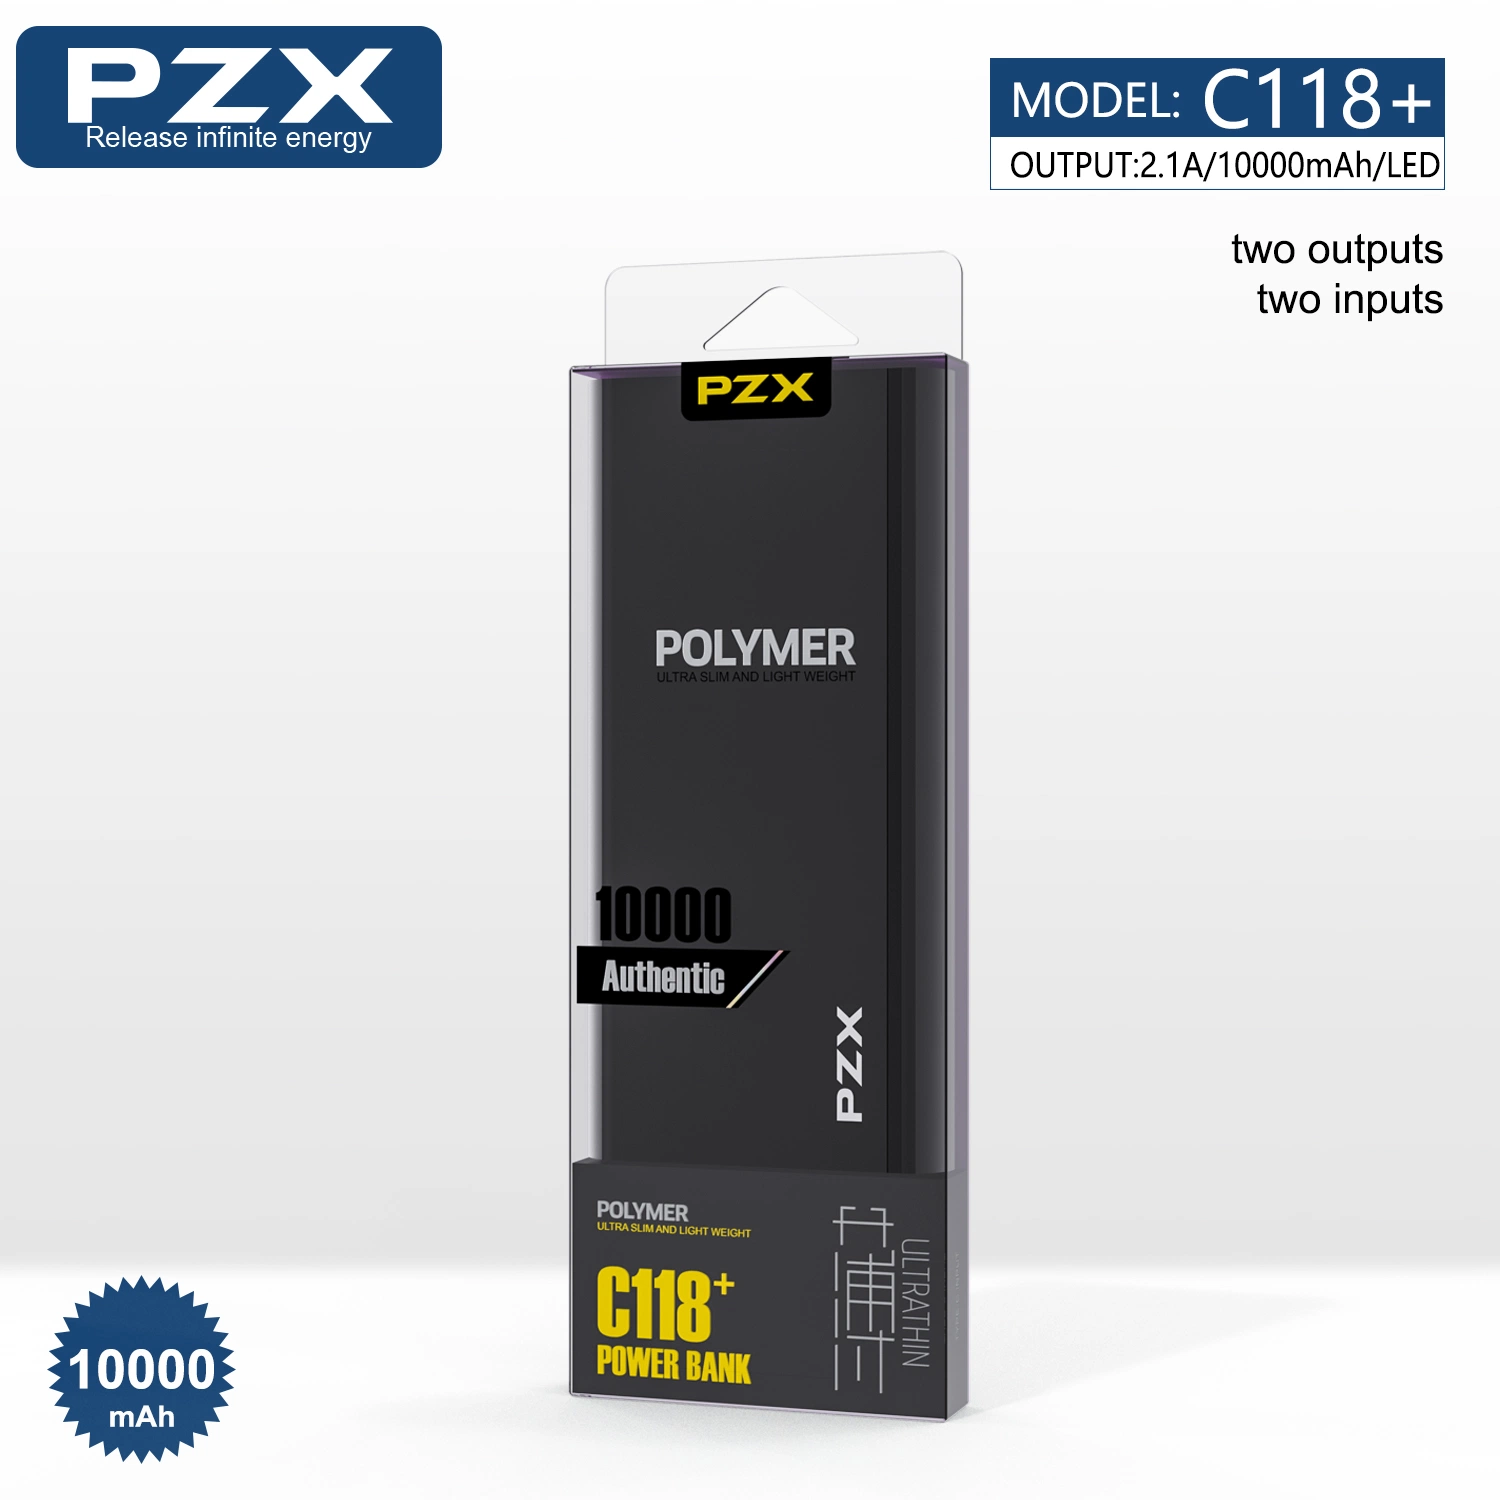 Pzx Rechargeable Battery 10000mAh Mobile Phone Charge Portable Power Bnak